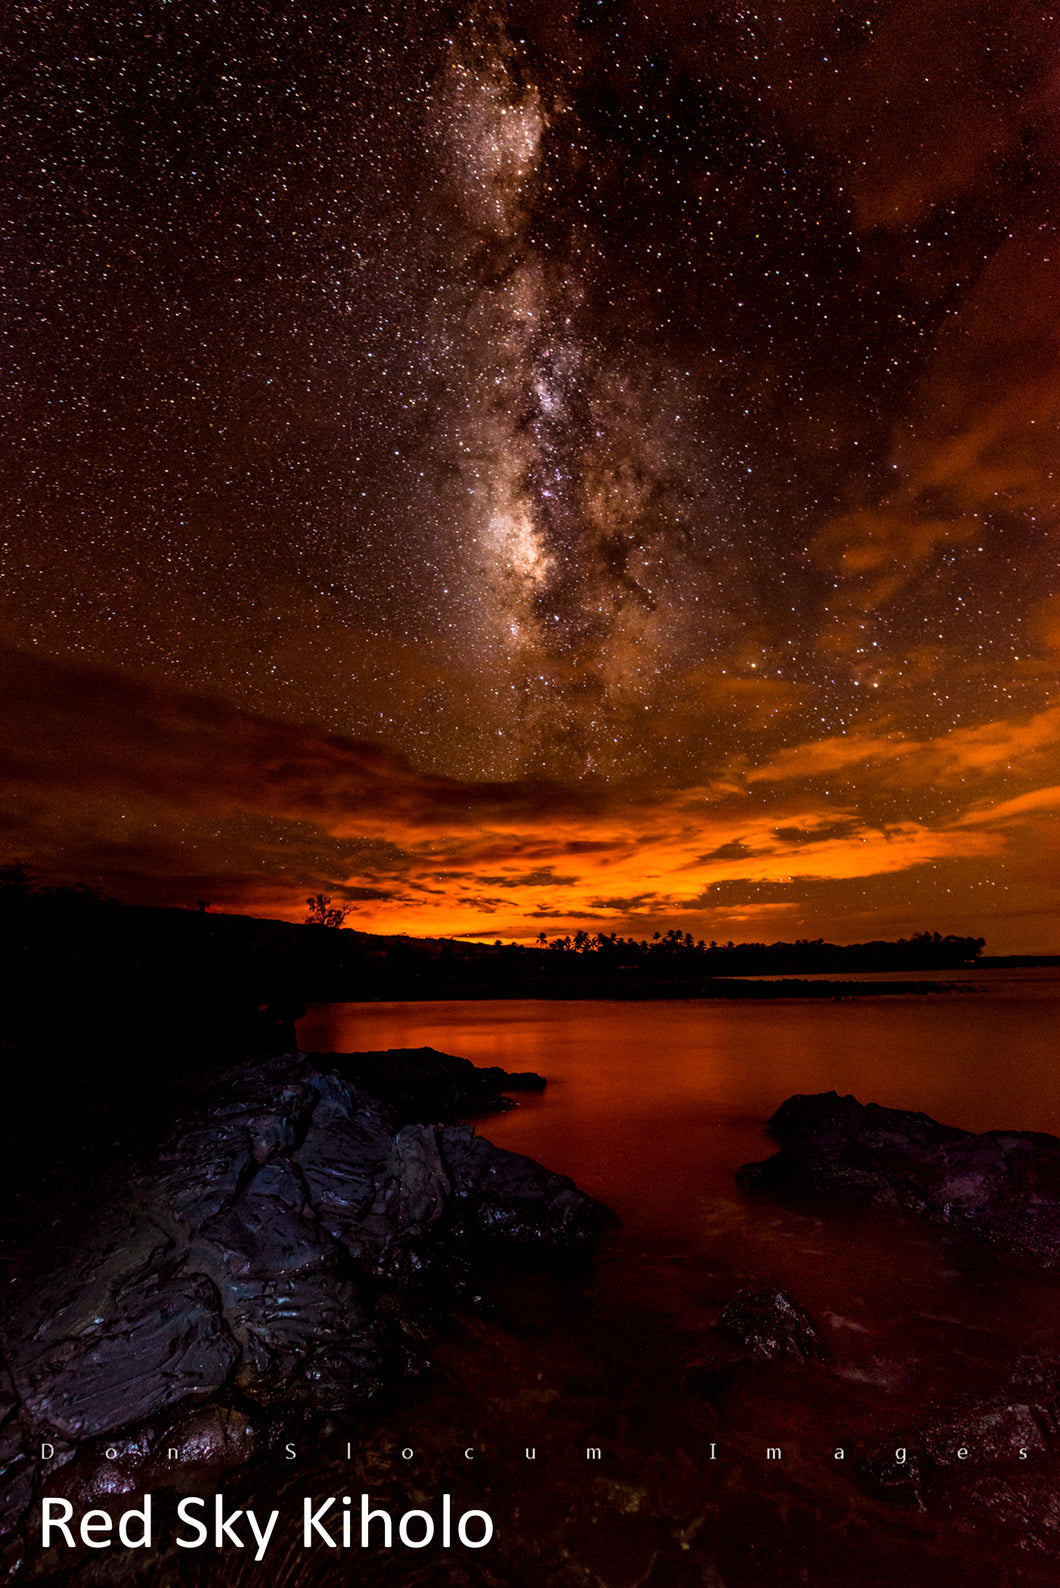 Red Sky Kiholo by Don Slocum